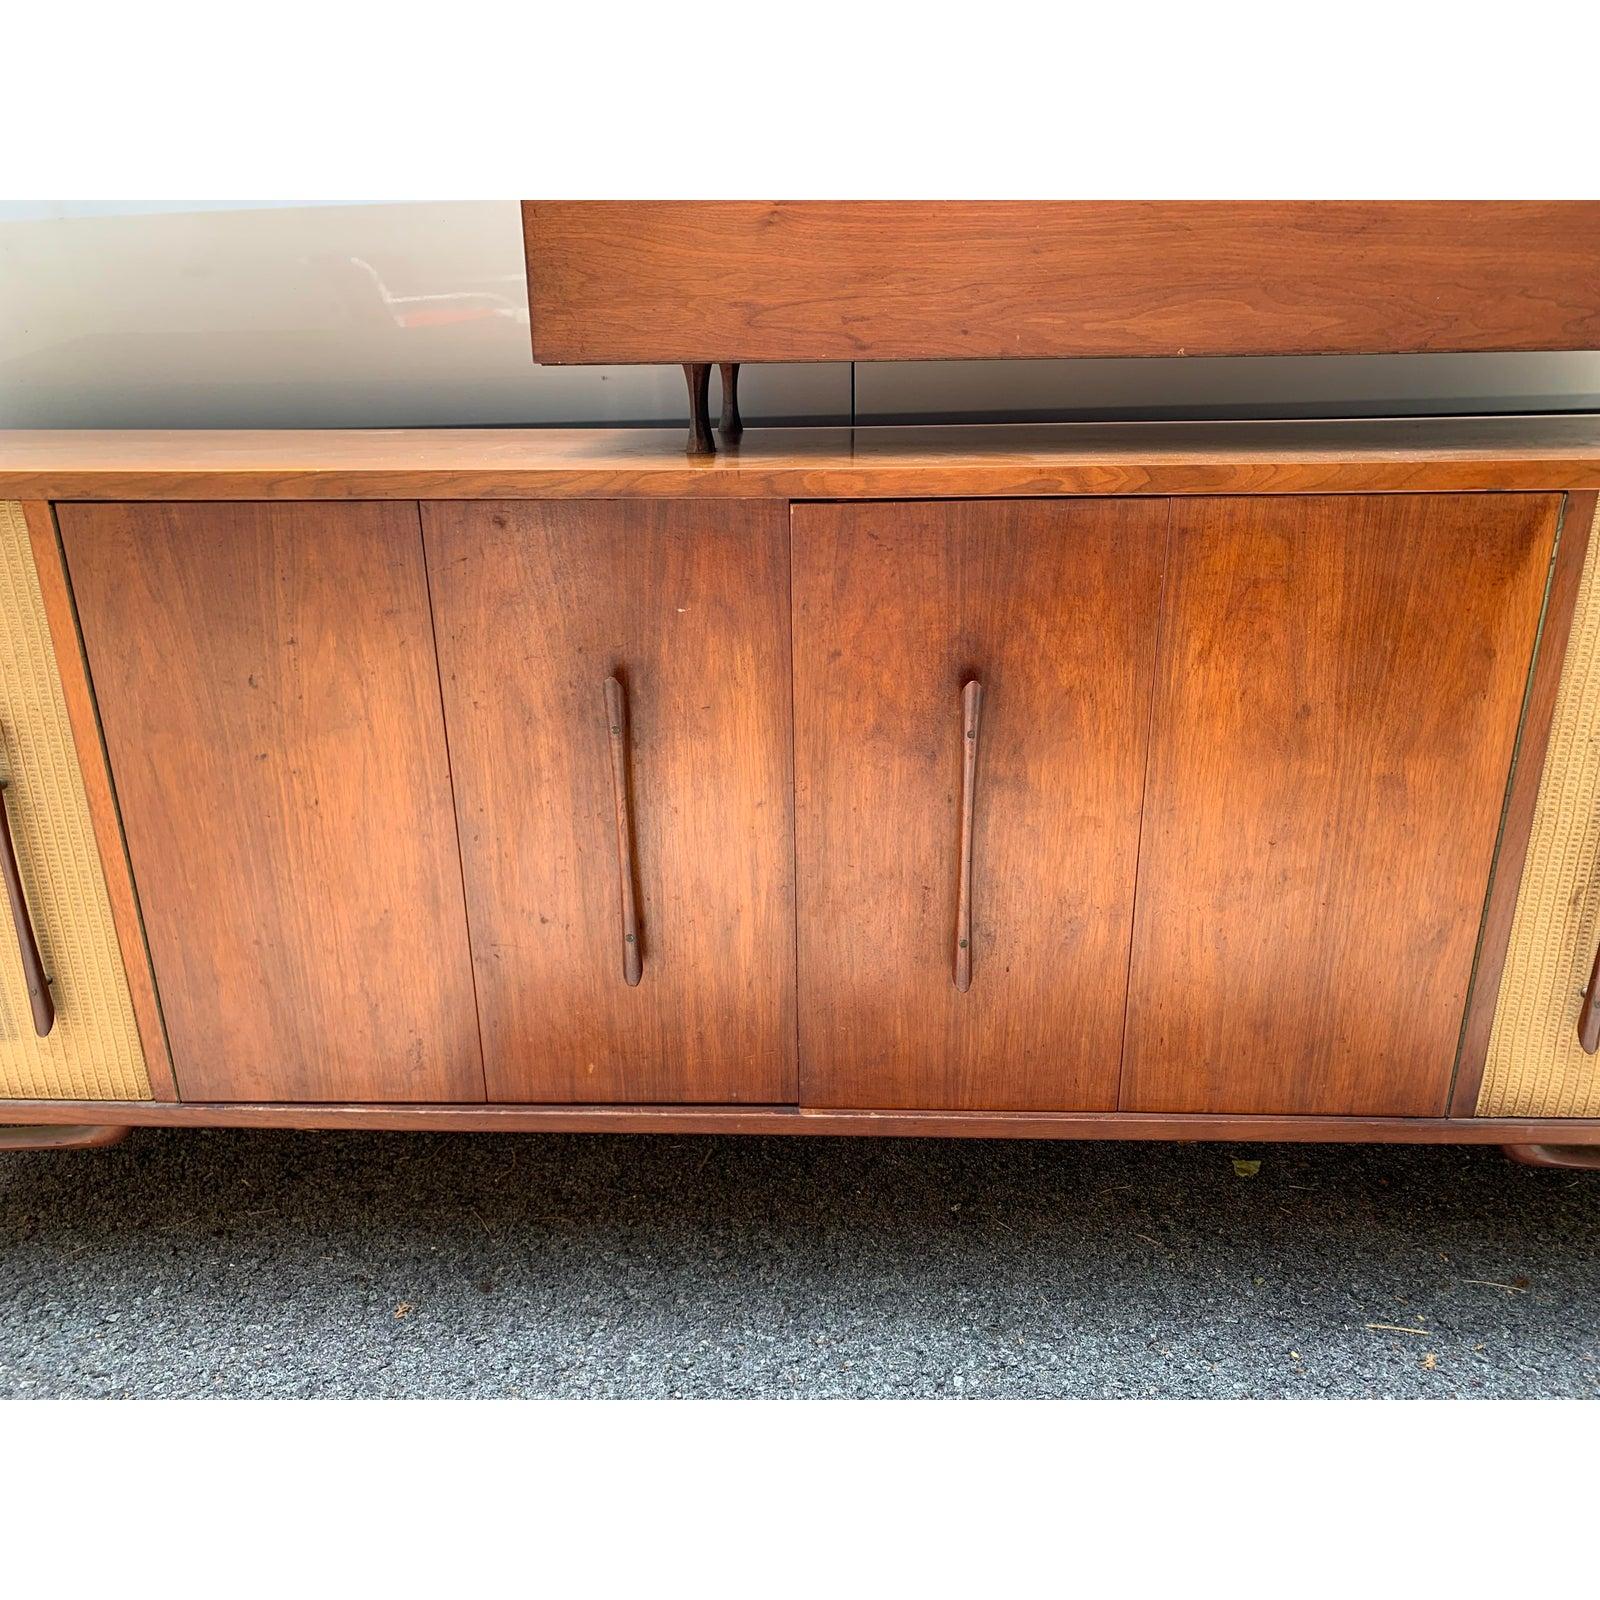 Mid century Danish teak bar & entertainment center. This is a great unique piece and is still in working order. Top piece does come off and can be used separate if wanted.